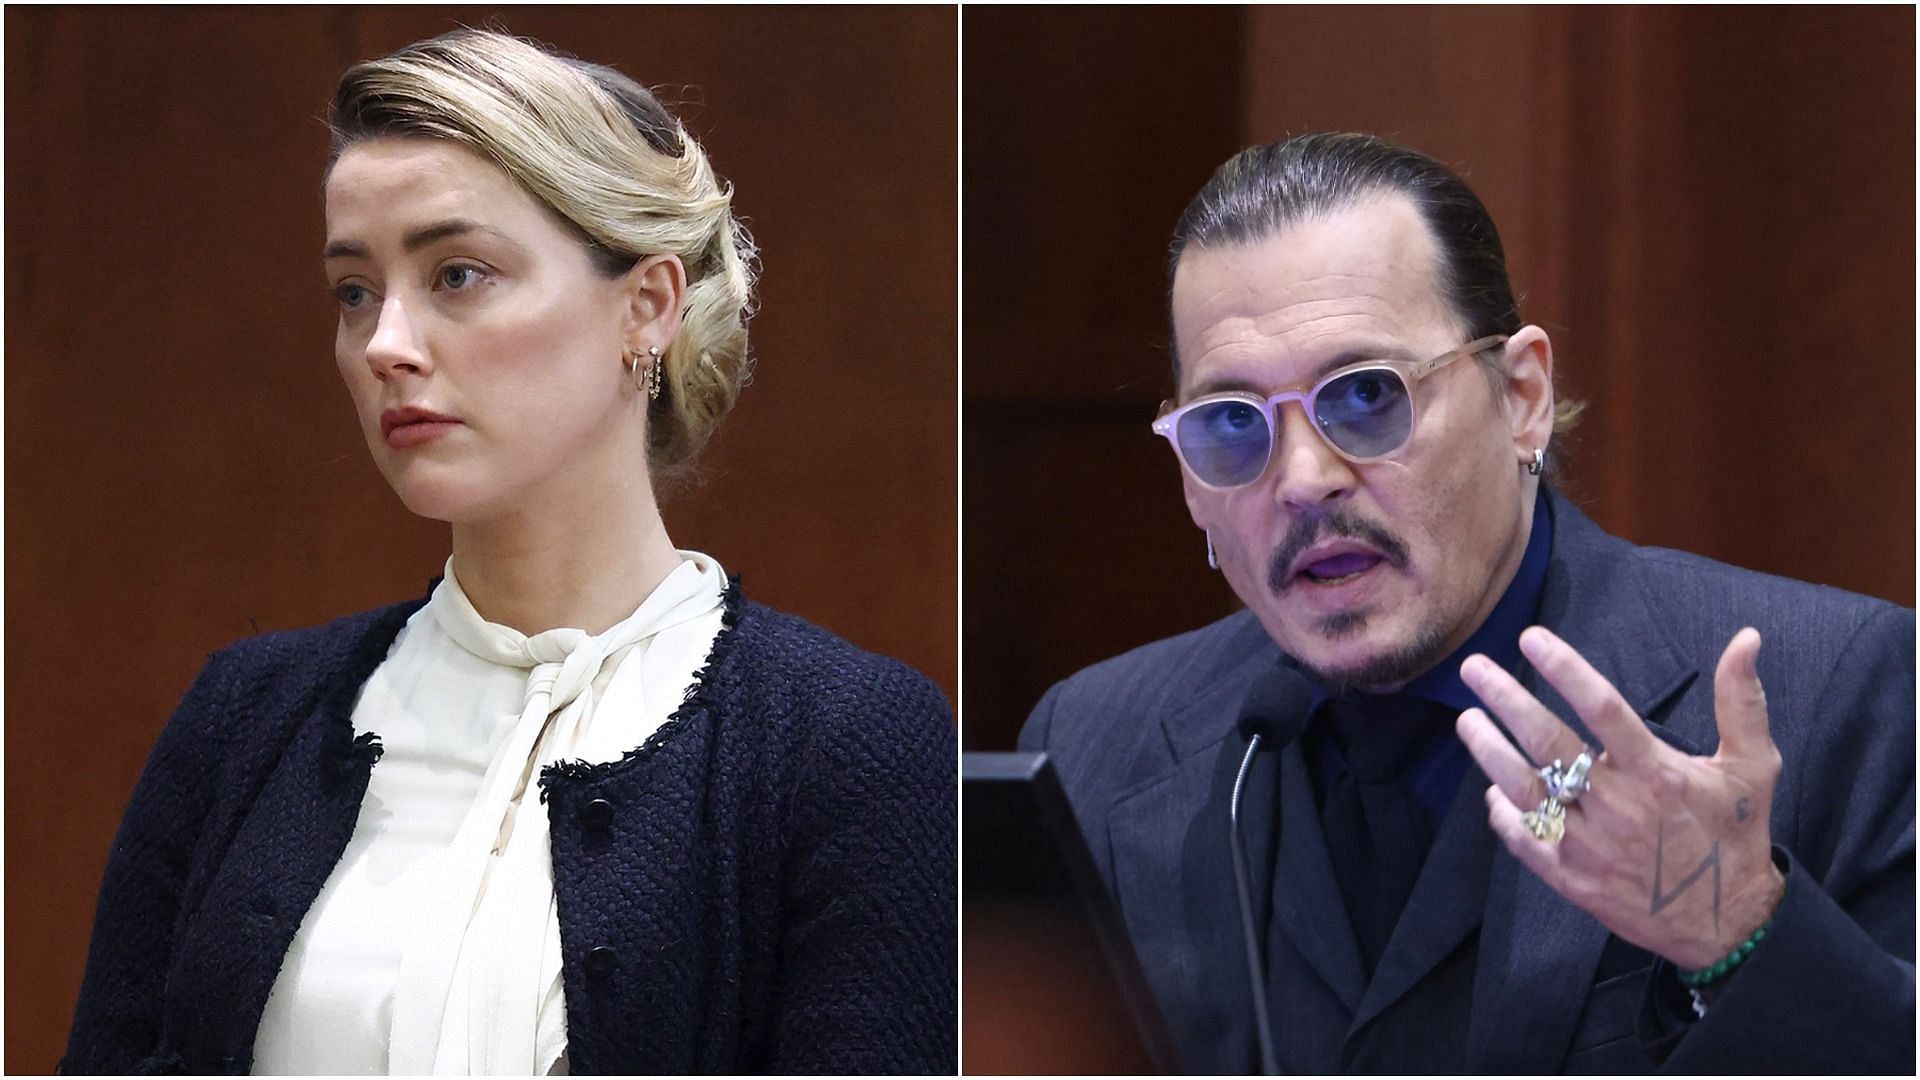 Amber Heard under fire for blaming Johnny Depp's dog, Boo for poop incident